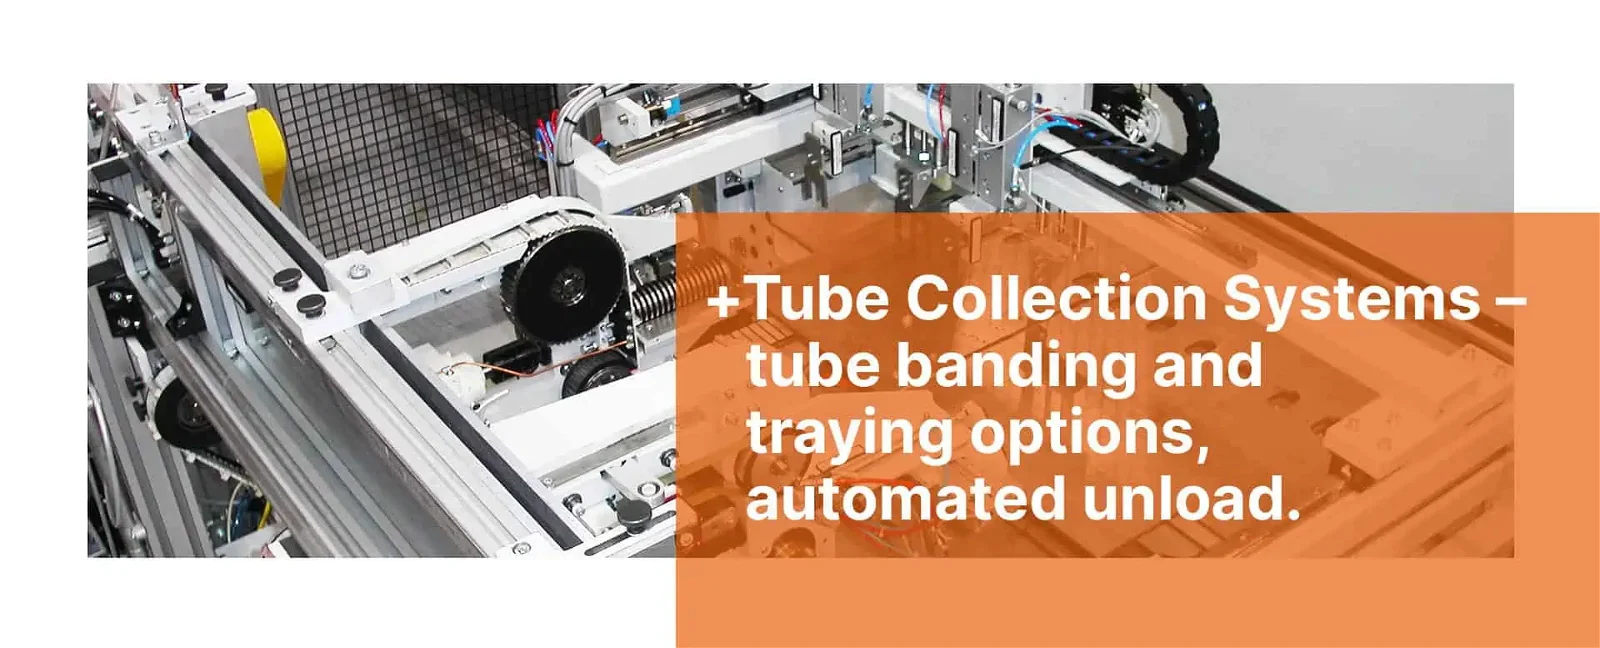 Tube Collection Systems